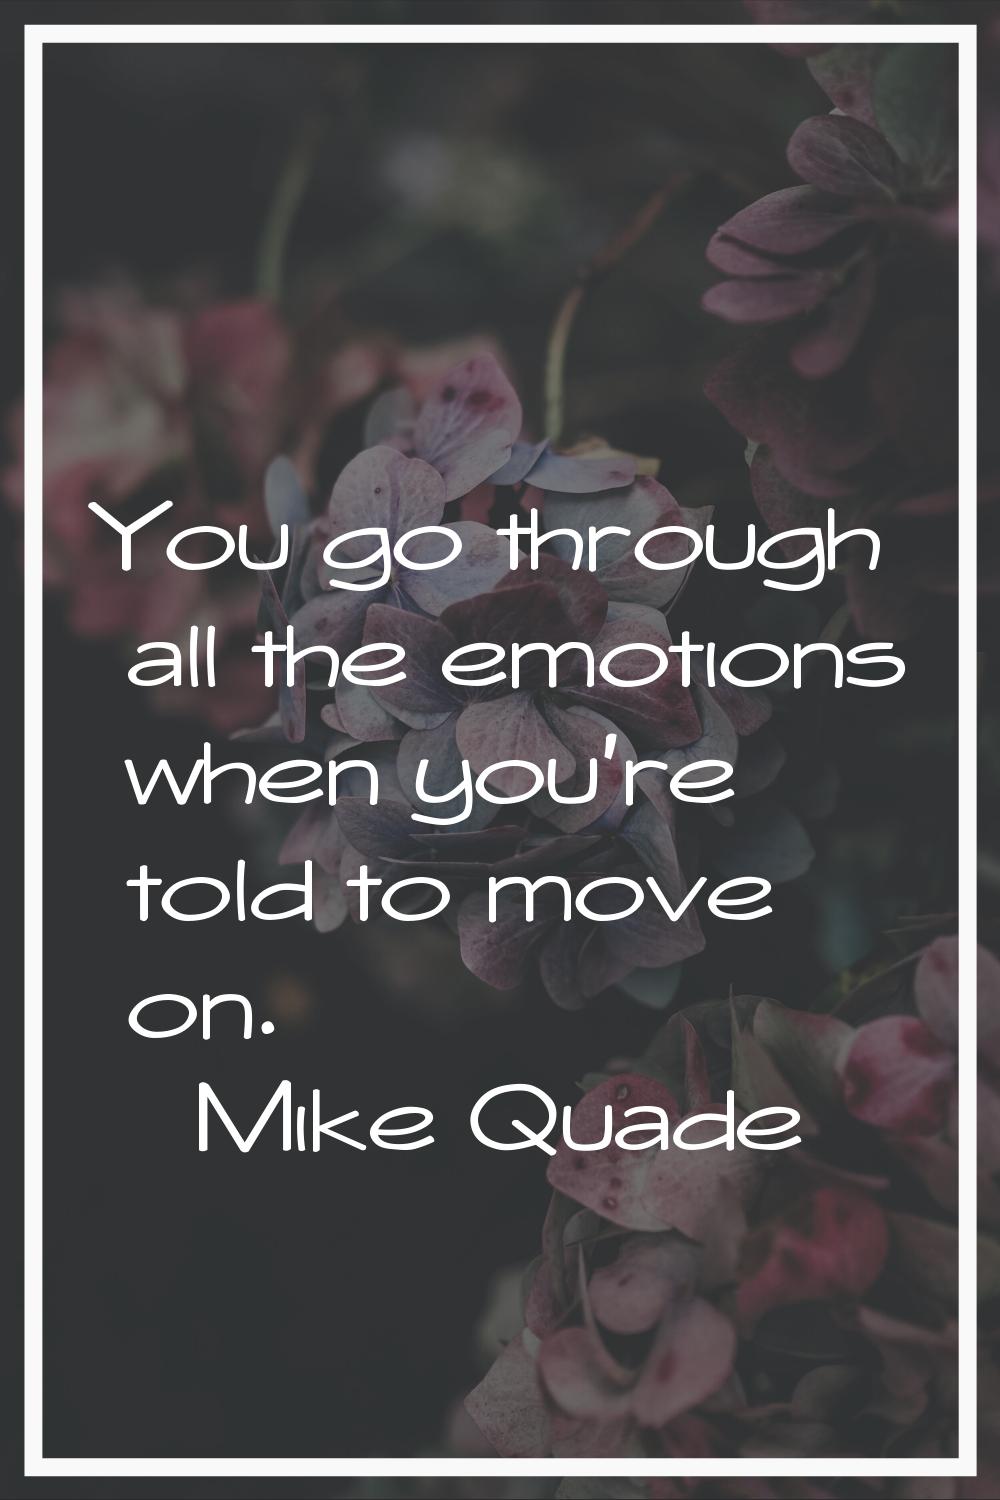 You go through all the emotions when you're told to move on.